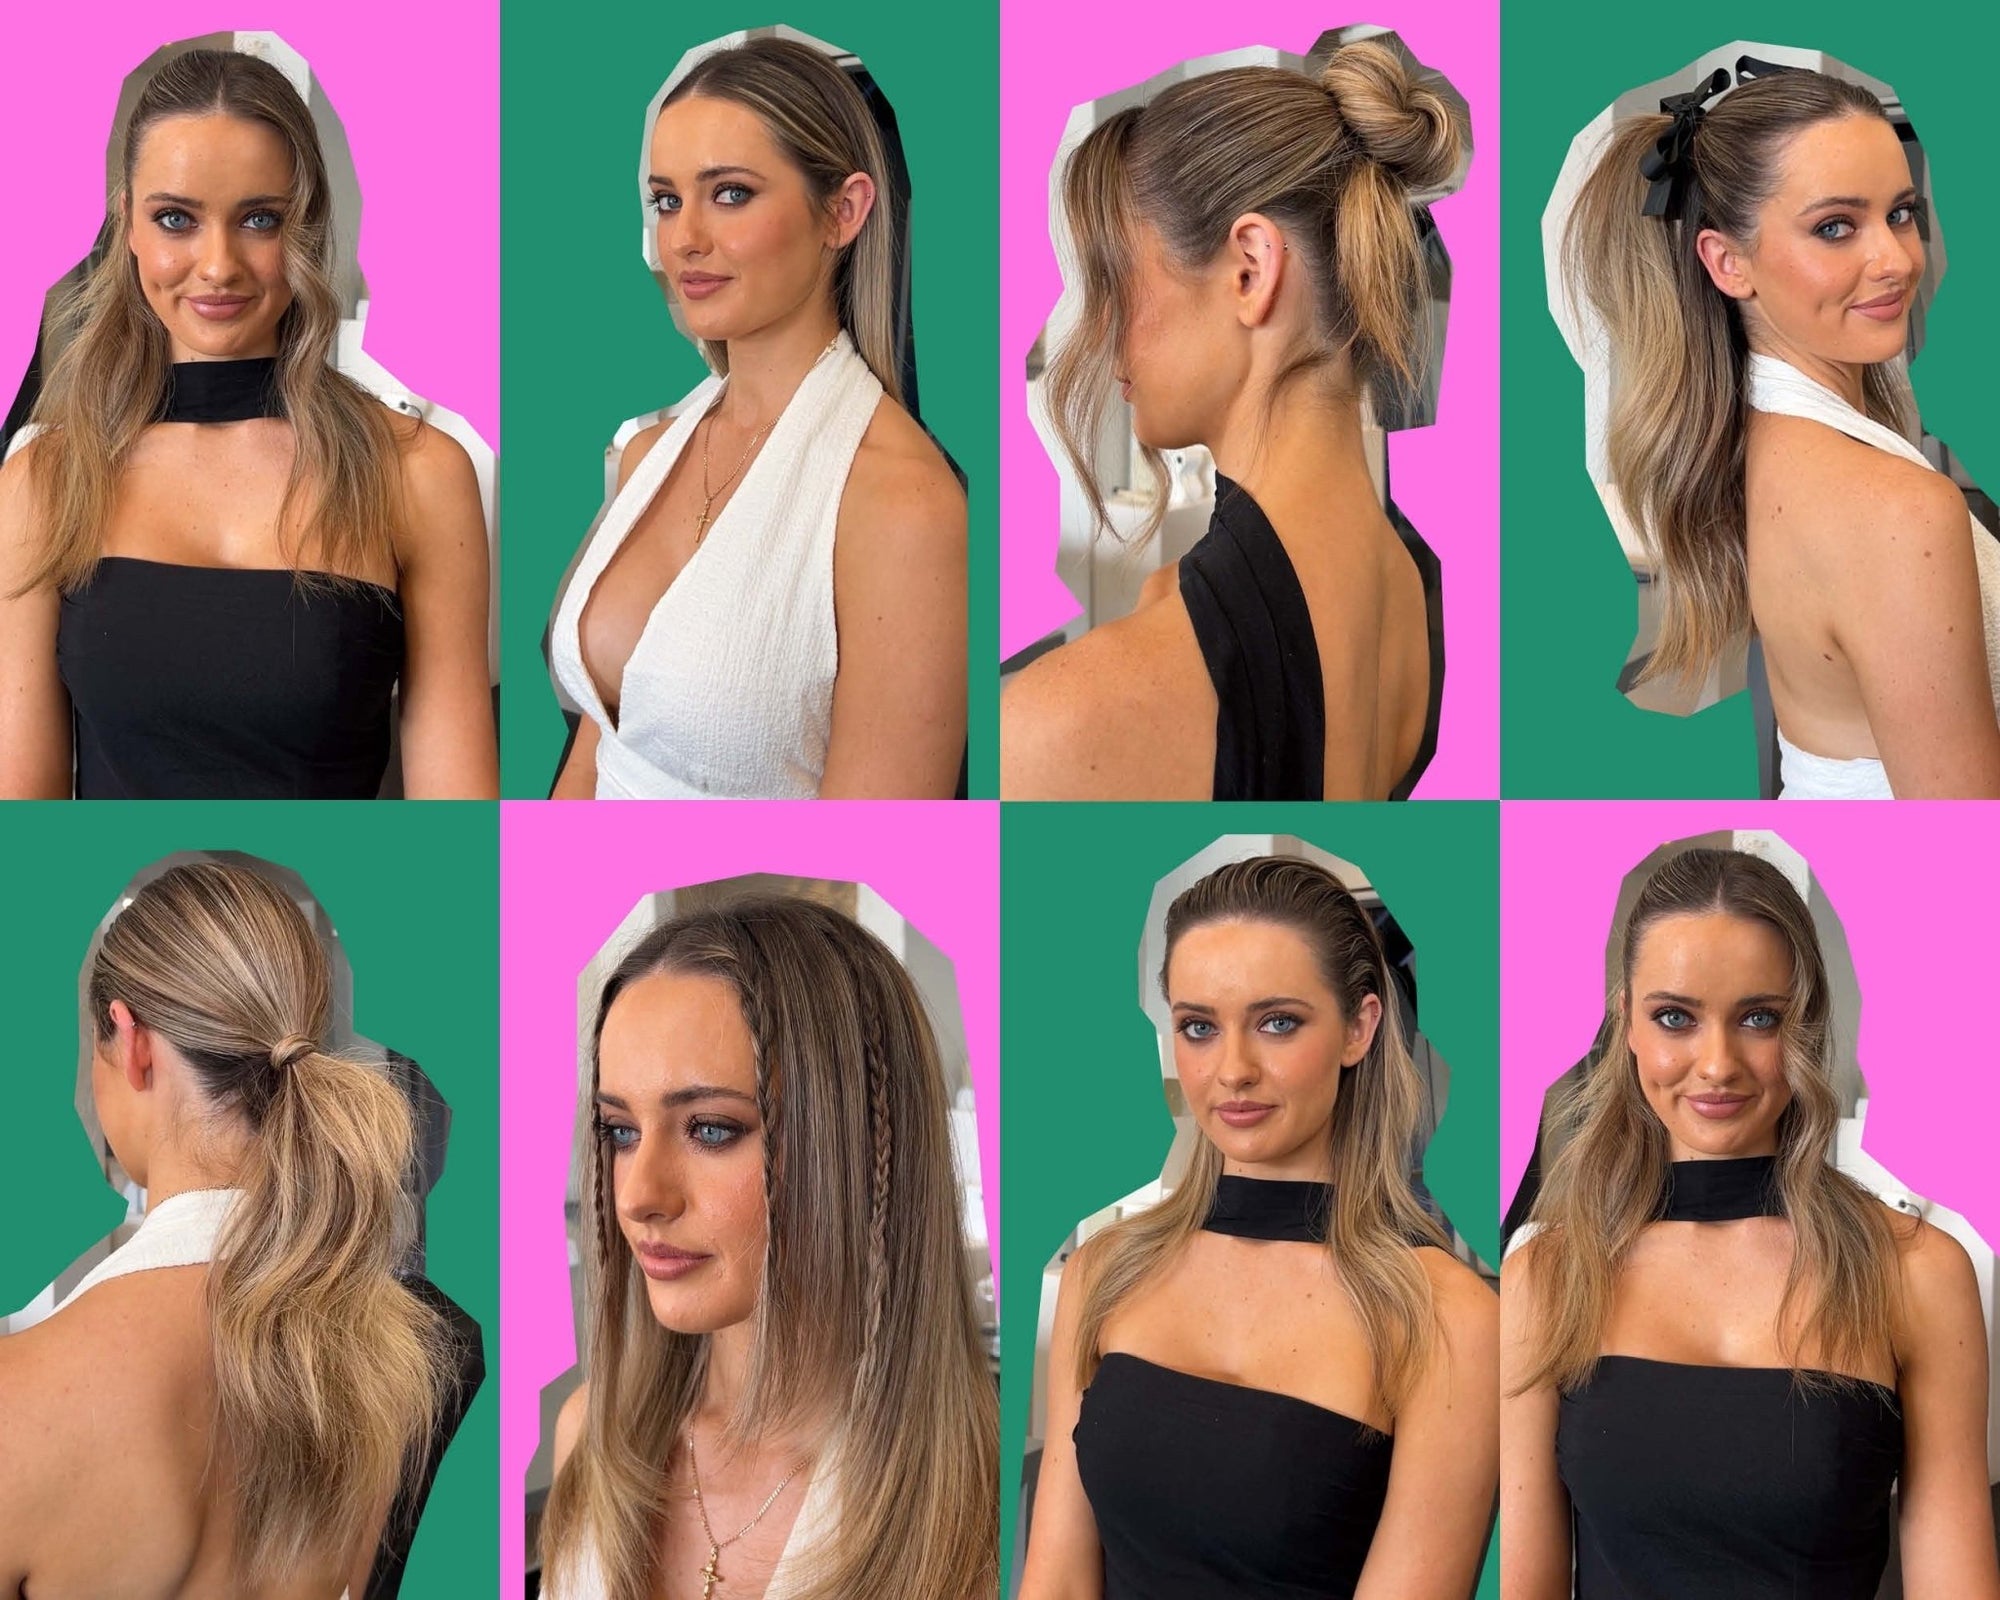 7 Days of Stunning Hairstyles: A Hairstylist's Guide - George Haircare